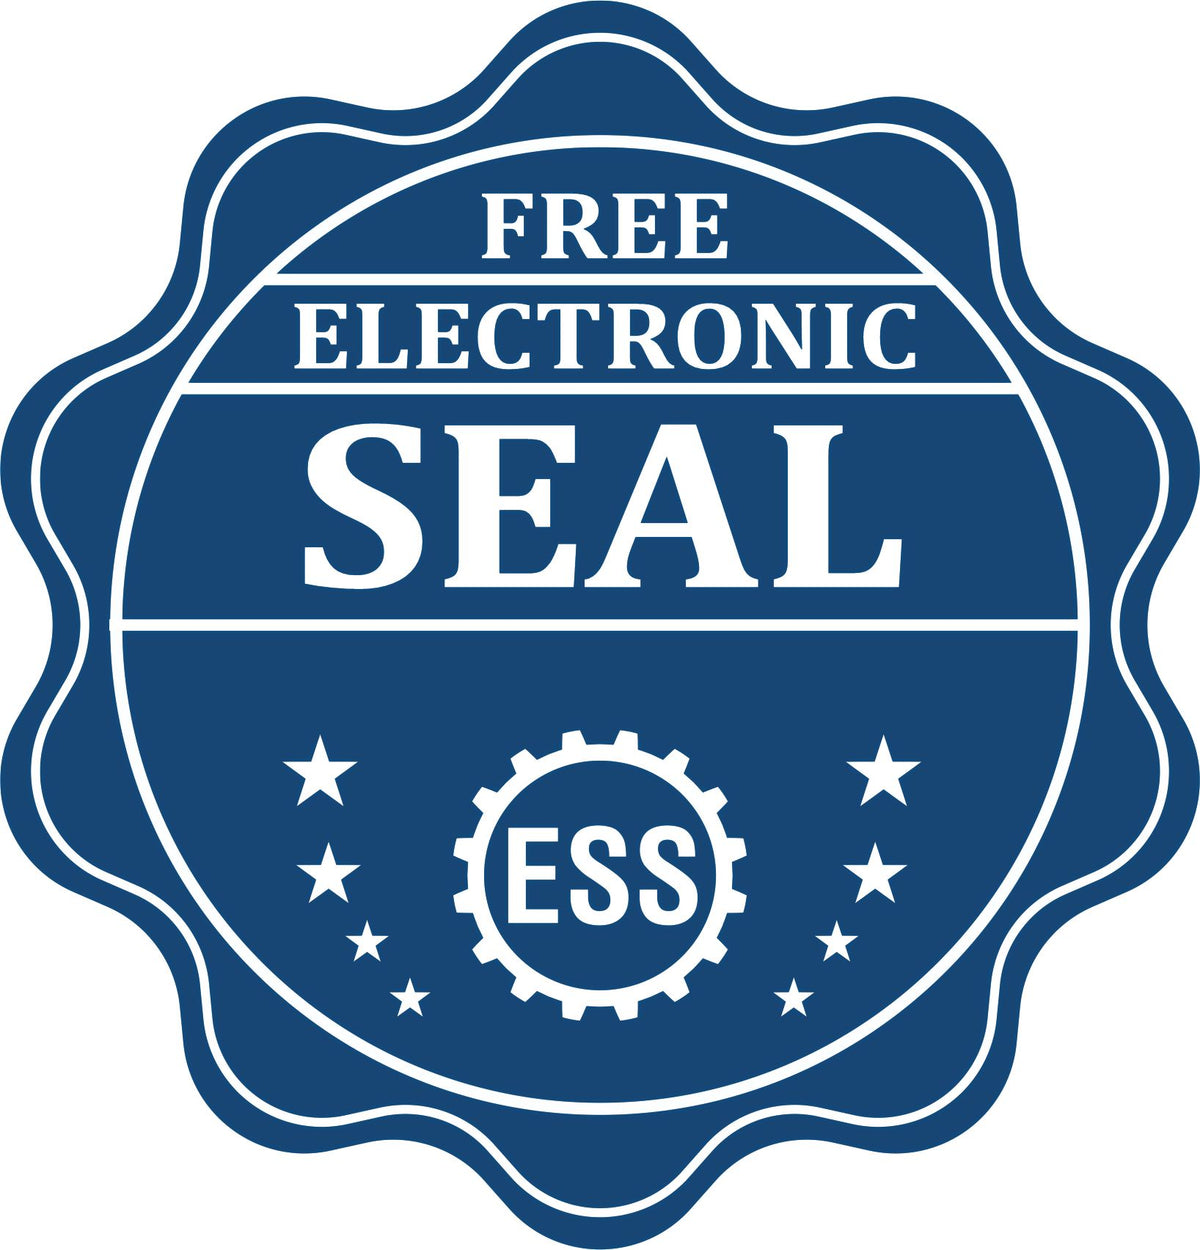 A badge showing a free electronic seal for the Gift West Virginia Architect Seal with stars and the ESS gear on the emblem.